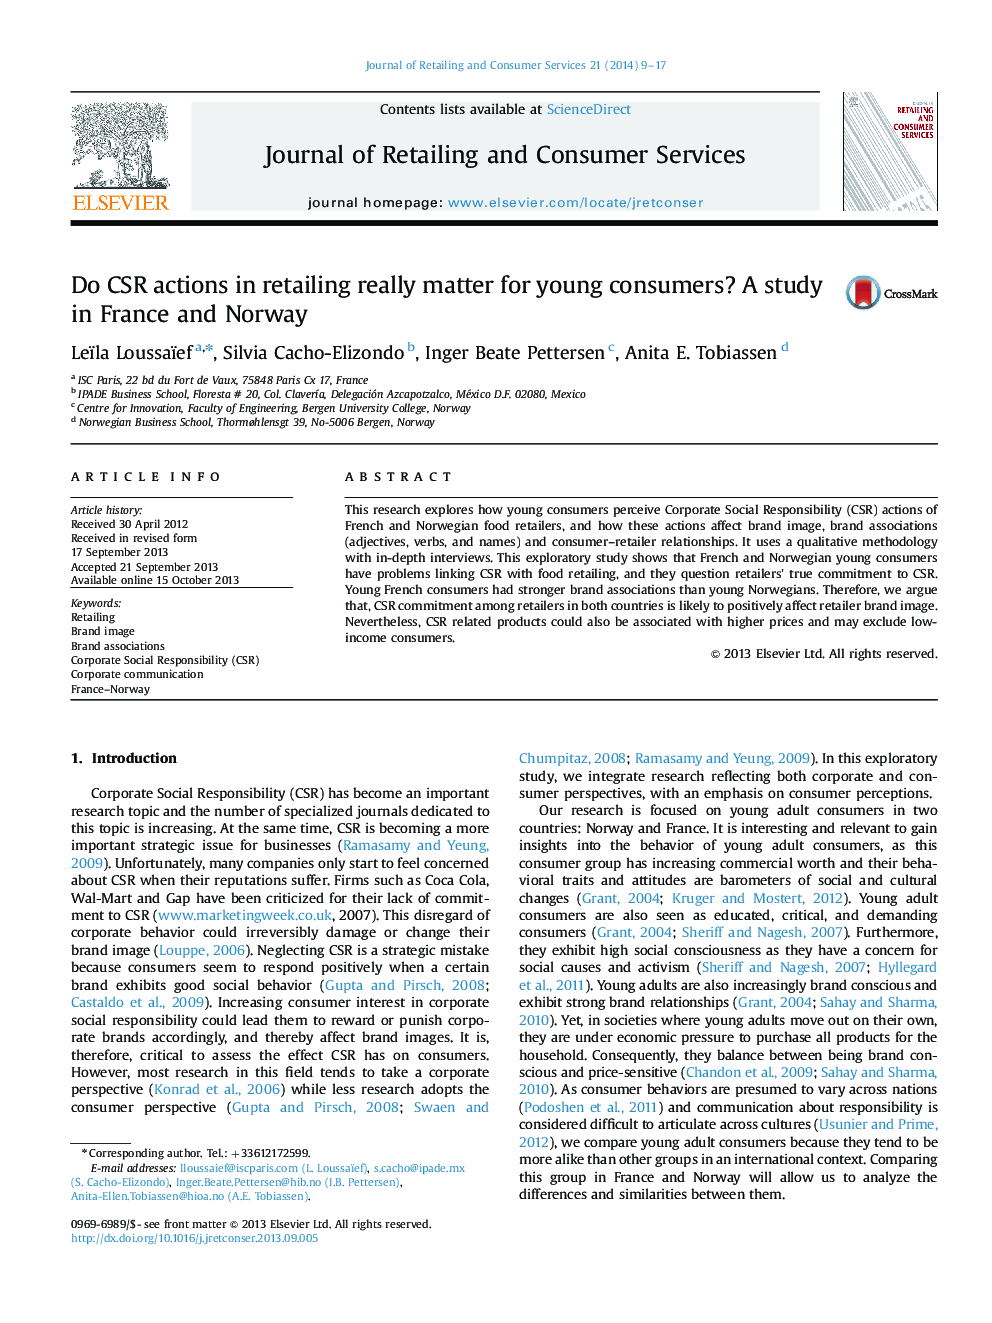 Do CSR actions in retailing really matter for young consumers? A study in France and Norway